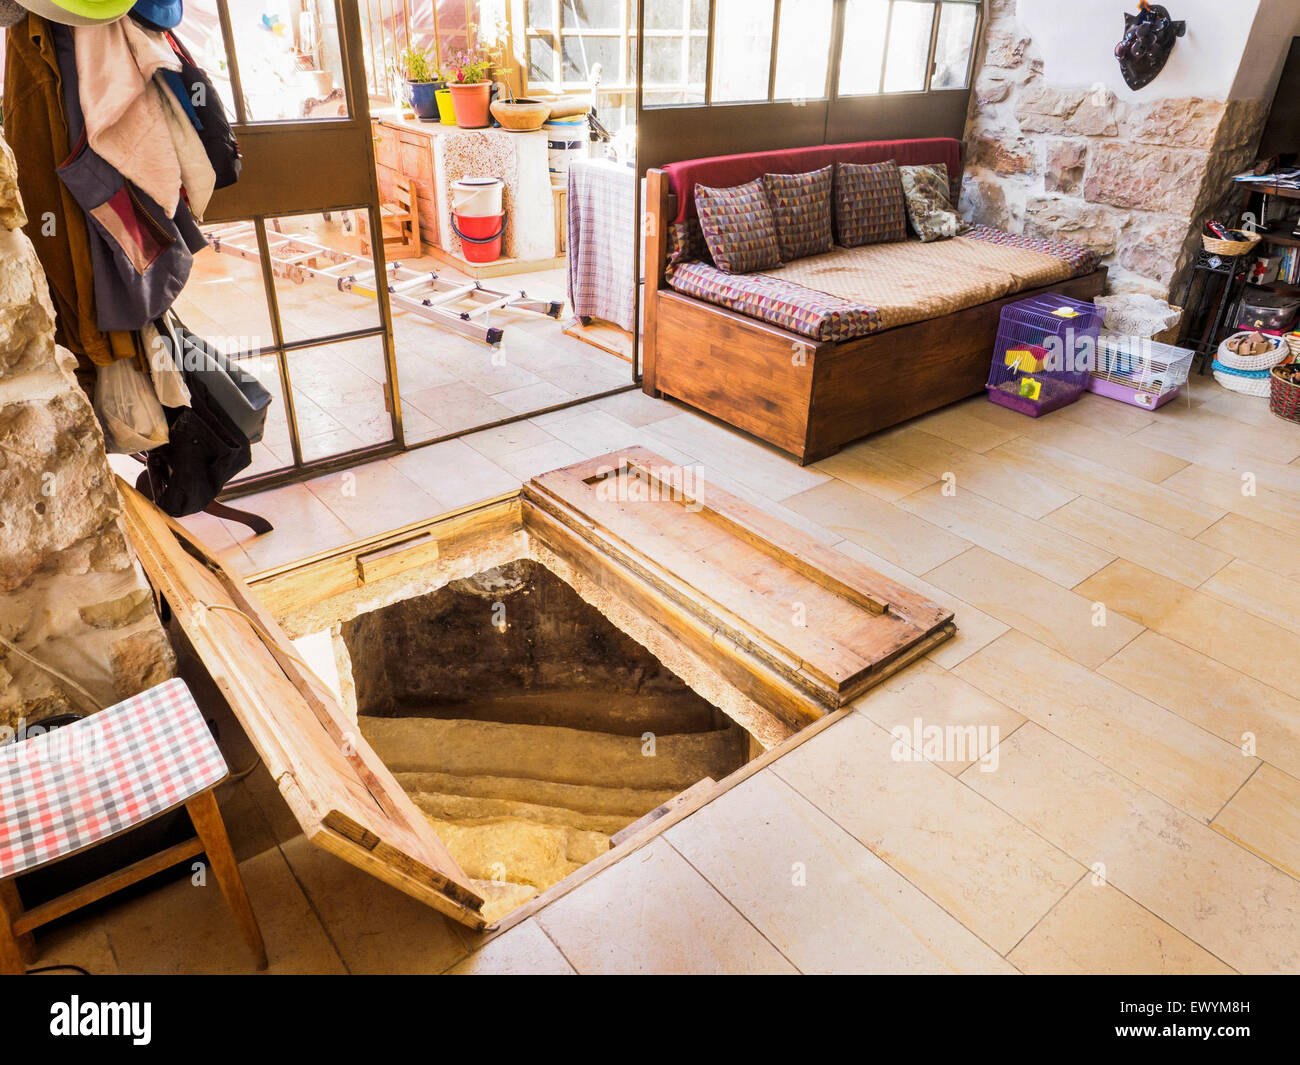 (150702) -- JERUSALEM, July 2, 2015 (Xinhua) -- A ritual bath that was discovered under a living room of a private house is seen near Jerusalem, on July 1, 2015. A 2000-year old ritual bath was discovered near Jerusalem under a living room of a private house, the Israeli Antiquities Authority said in a statement on Wednesday. The ancient ritual bath, known in Hebrew as a mikve, was discovered amid renovations of a private home in Ein Karem, a village near Jerusalem, and believed to have originated from the period of the Second Temple, which was a Jewish temple situated in Jerusalem between 516 Stock Photo